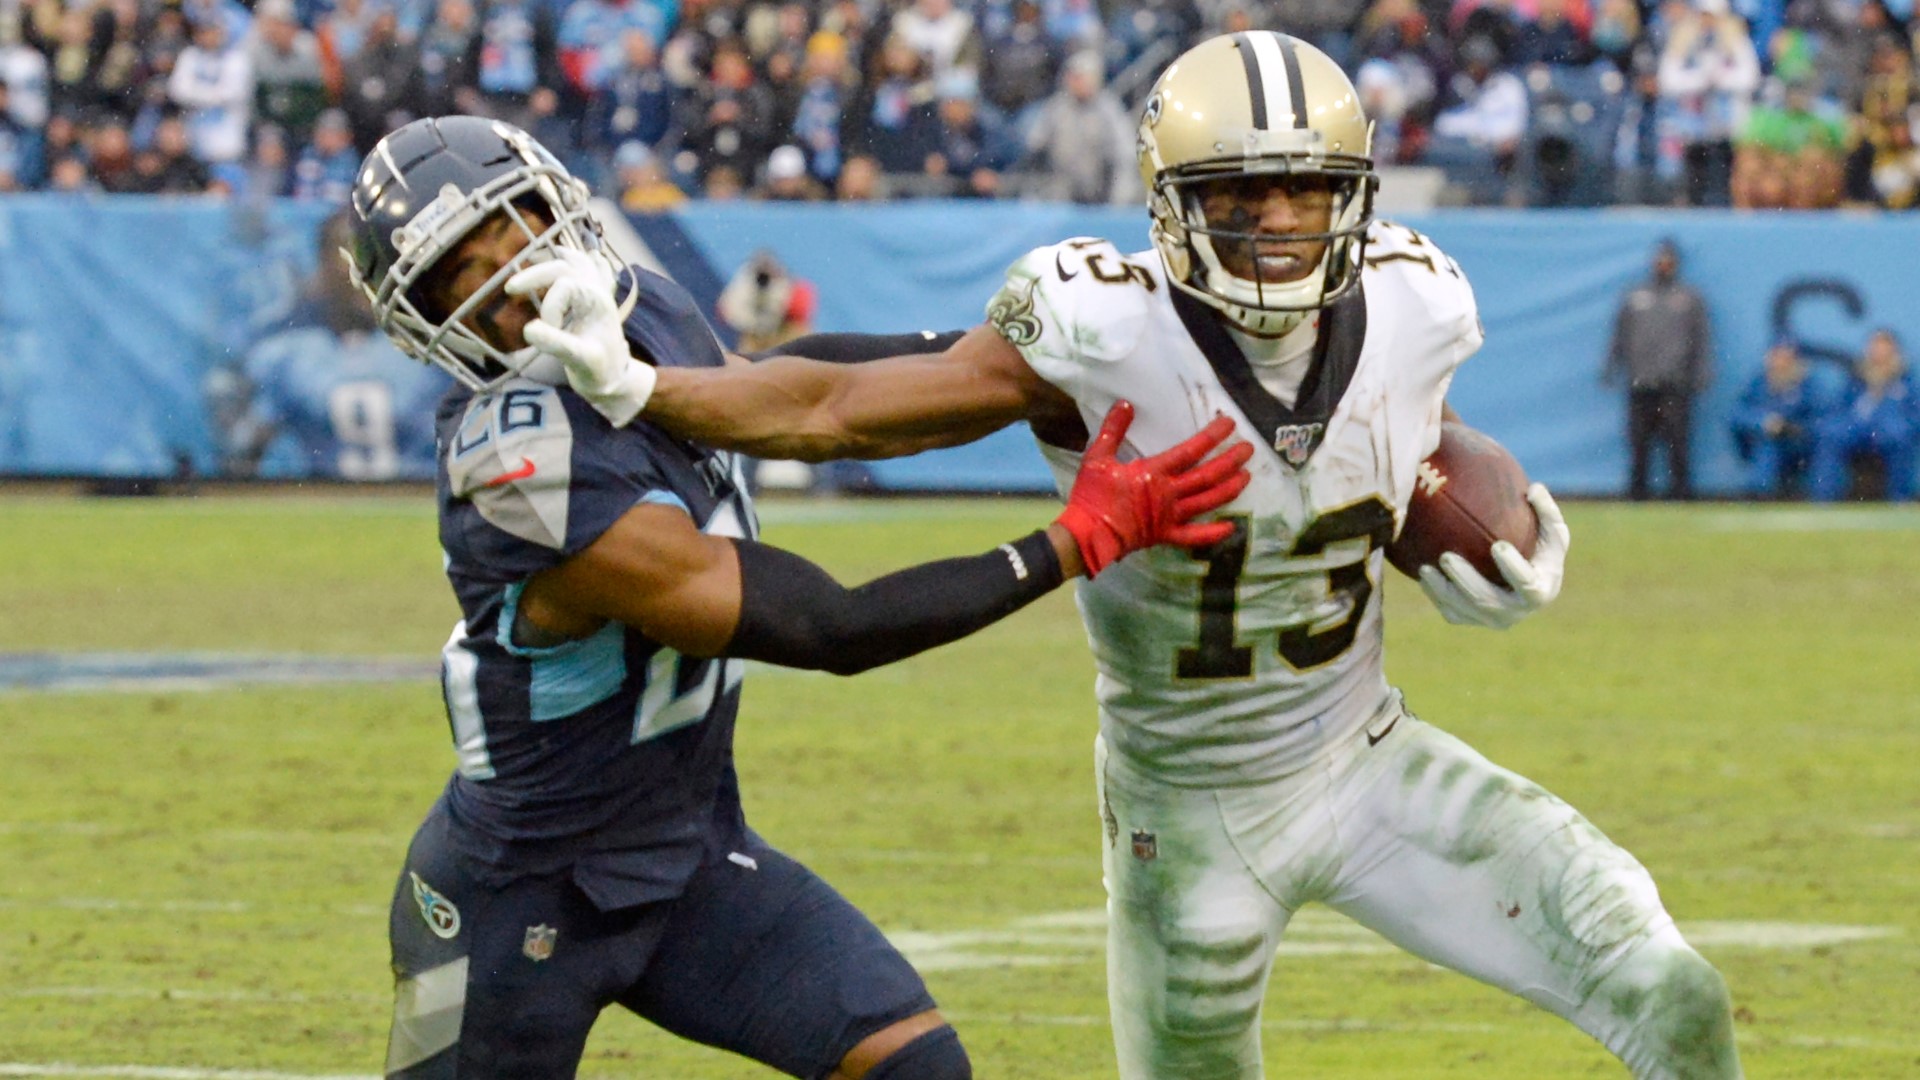 It could take 3-4 months for Michael Thomas to get back on the field after surgery